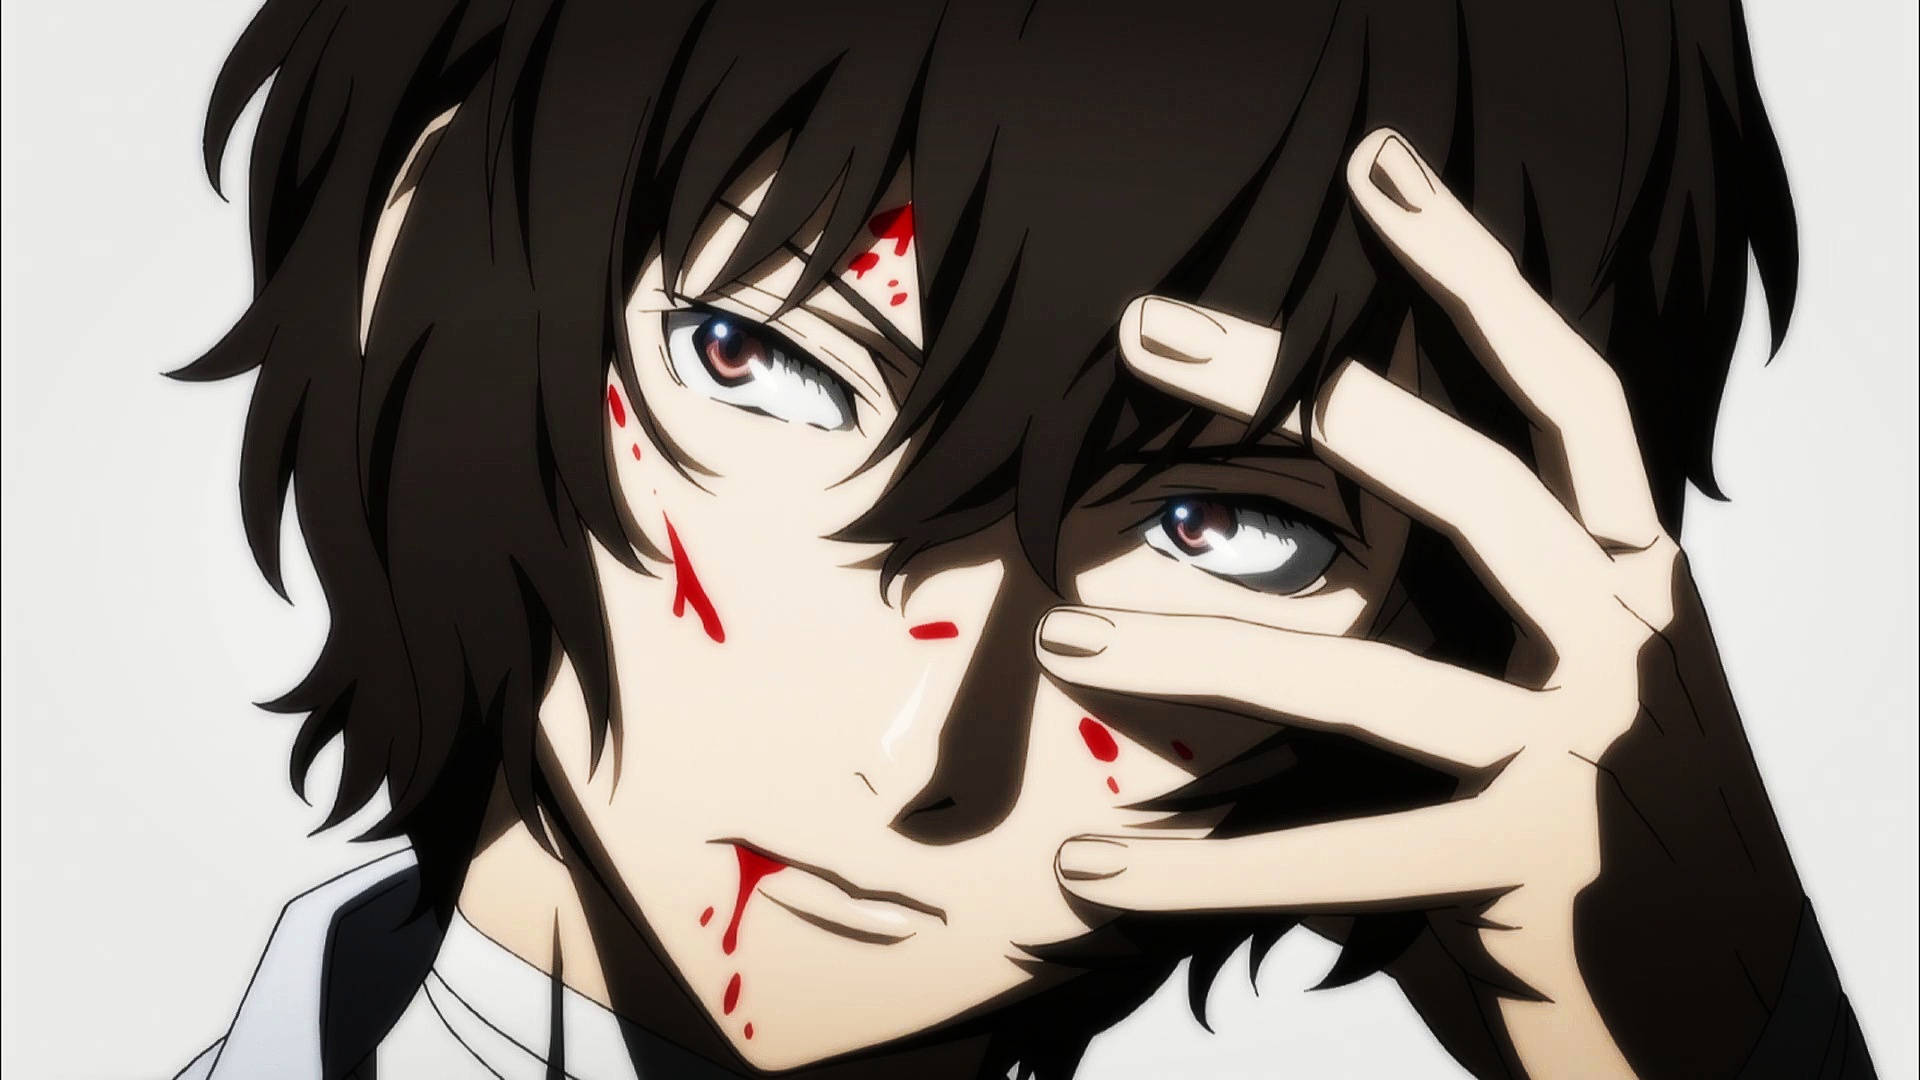 A Gripping Image Of Dazai In Action Background